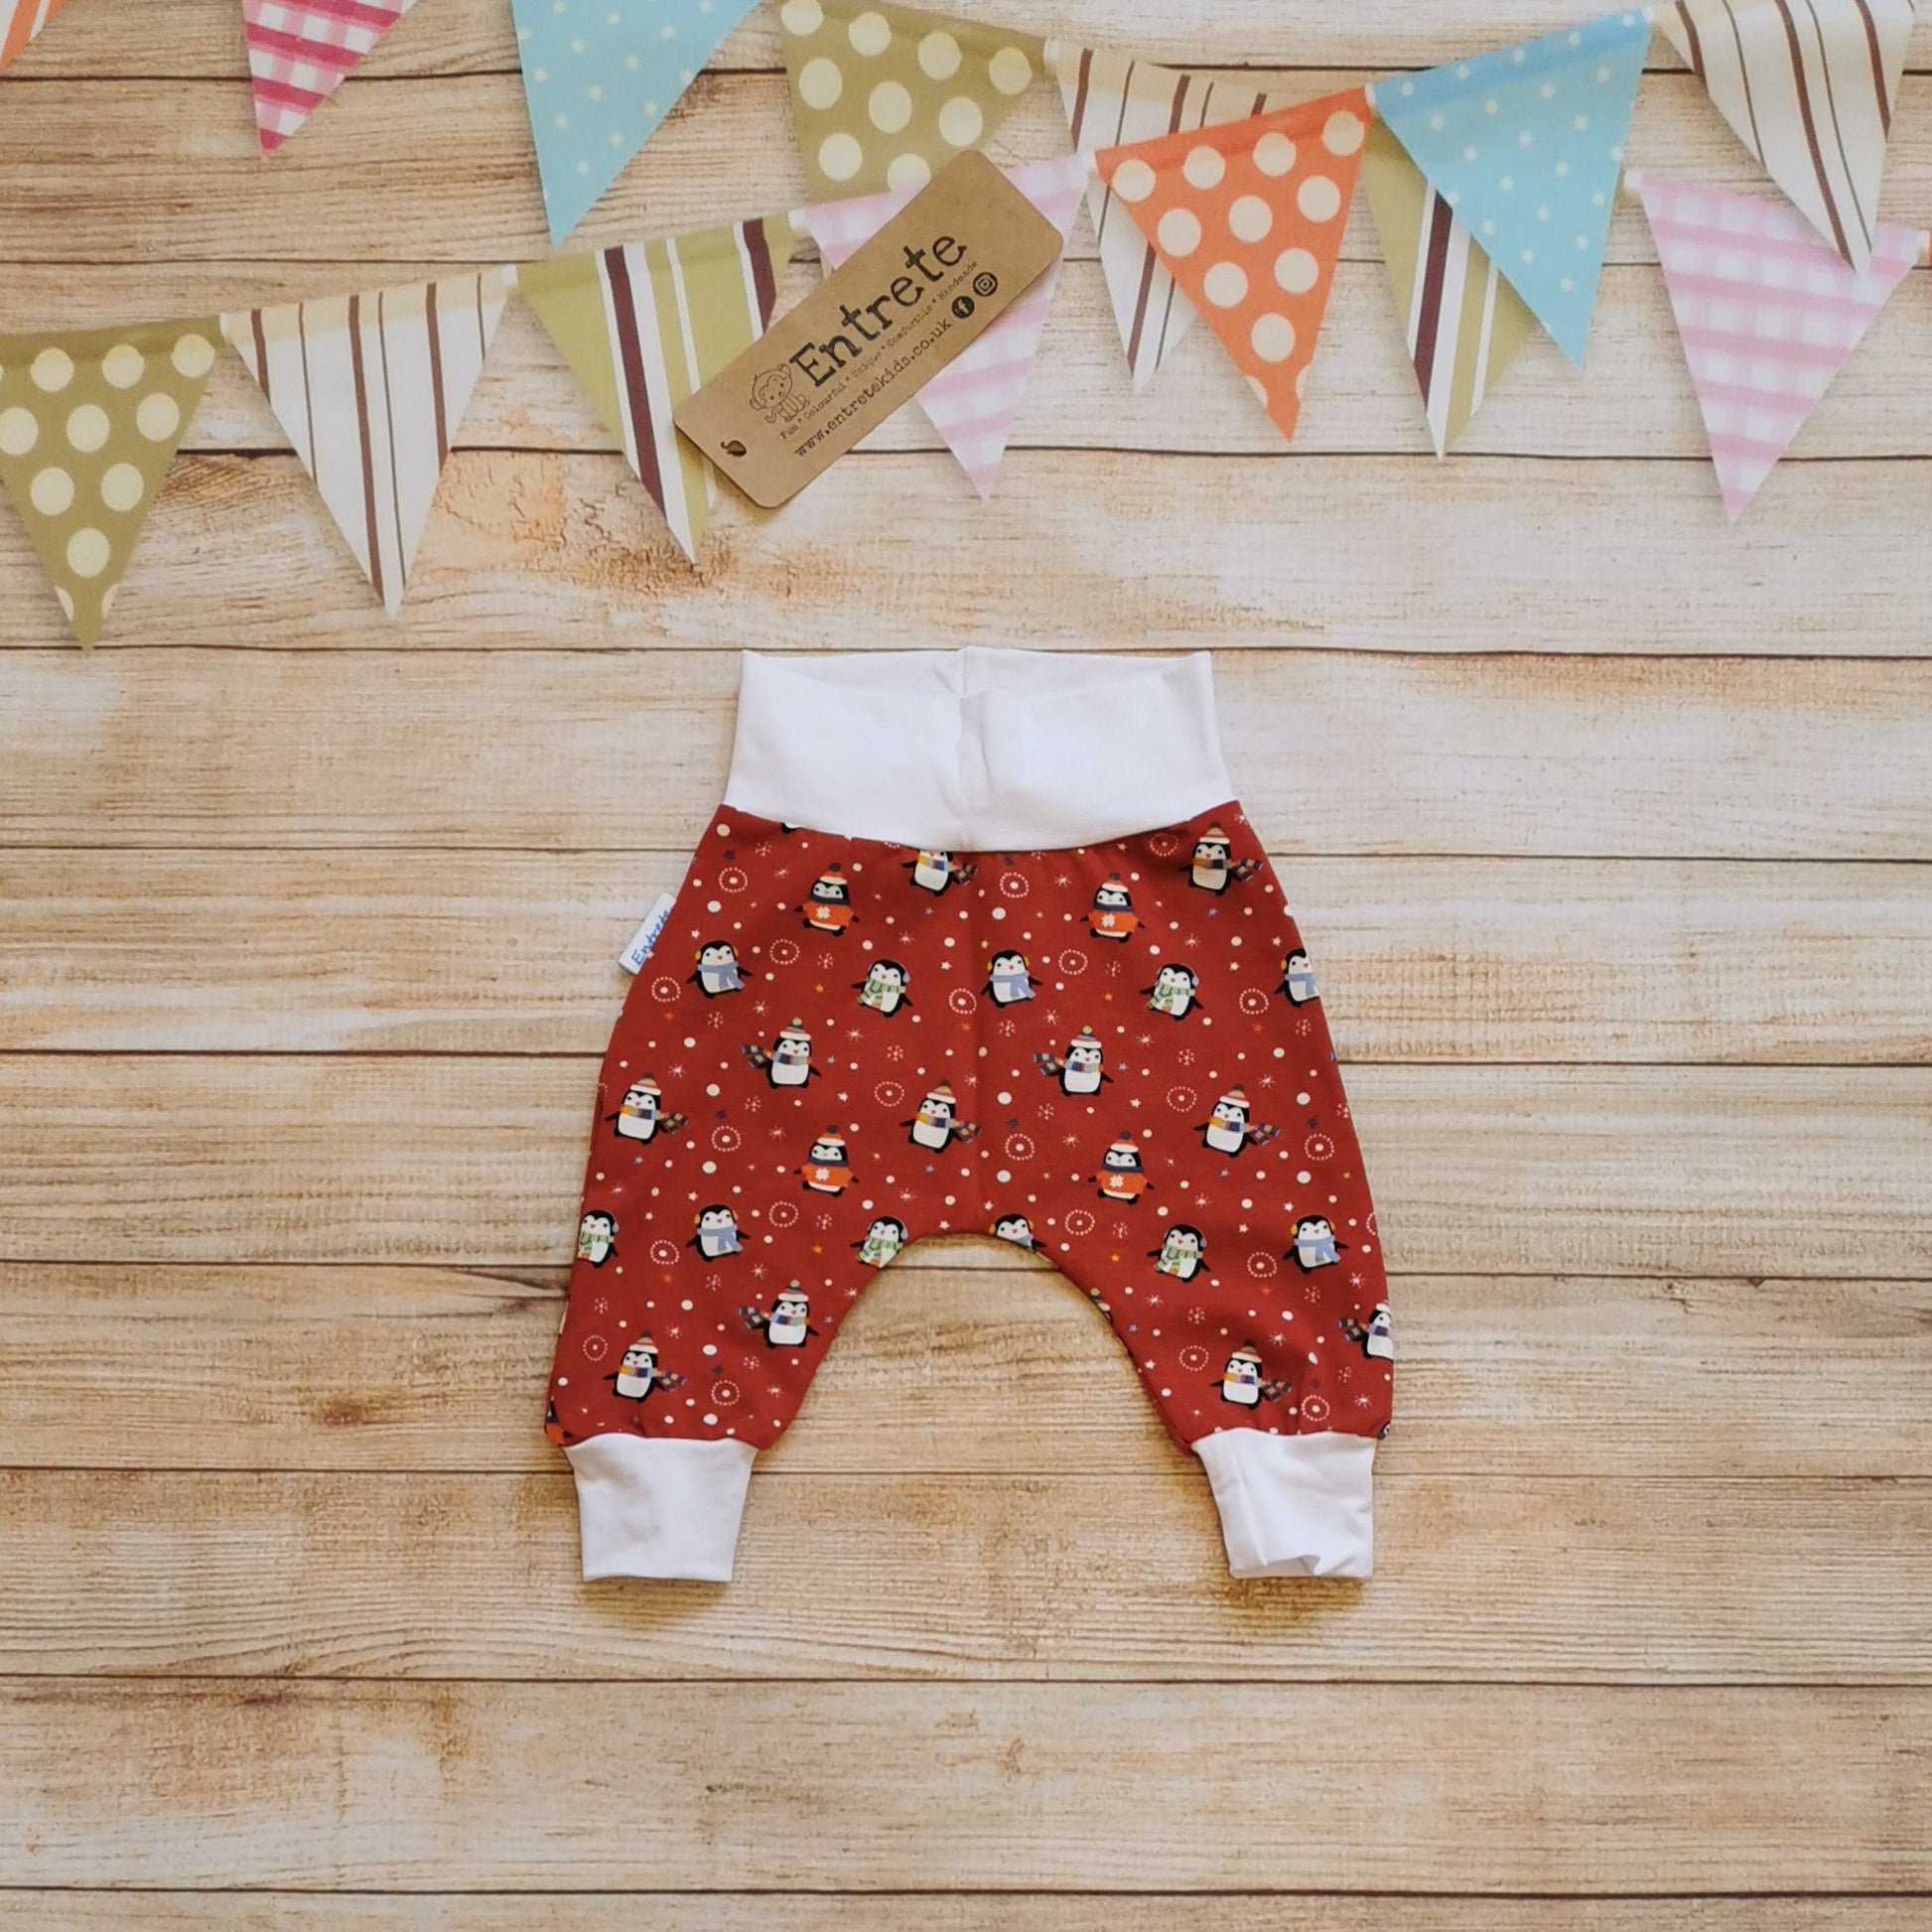 Super comfy harem pants in a fun Christmas design. Handmade using red penguins cotton jersey and white cotton jersey.